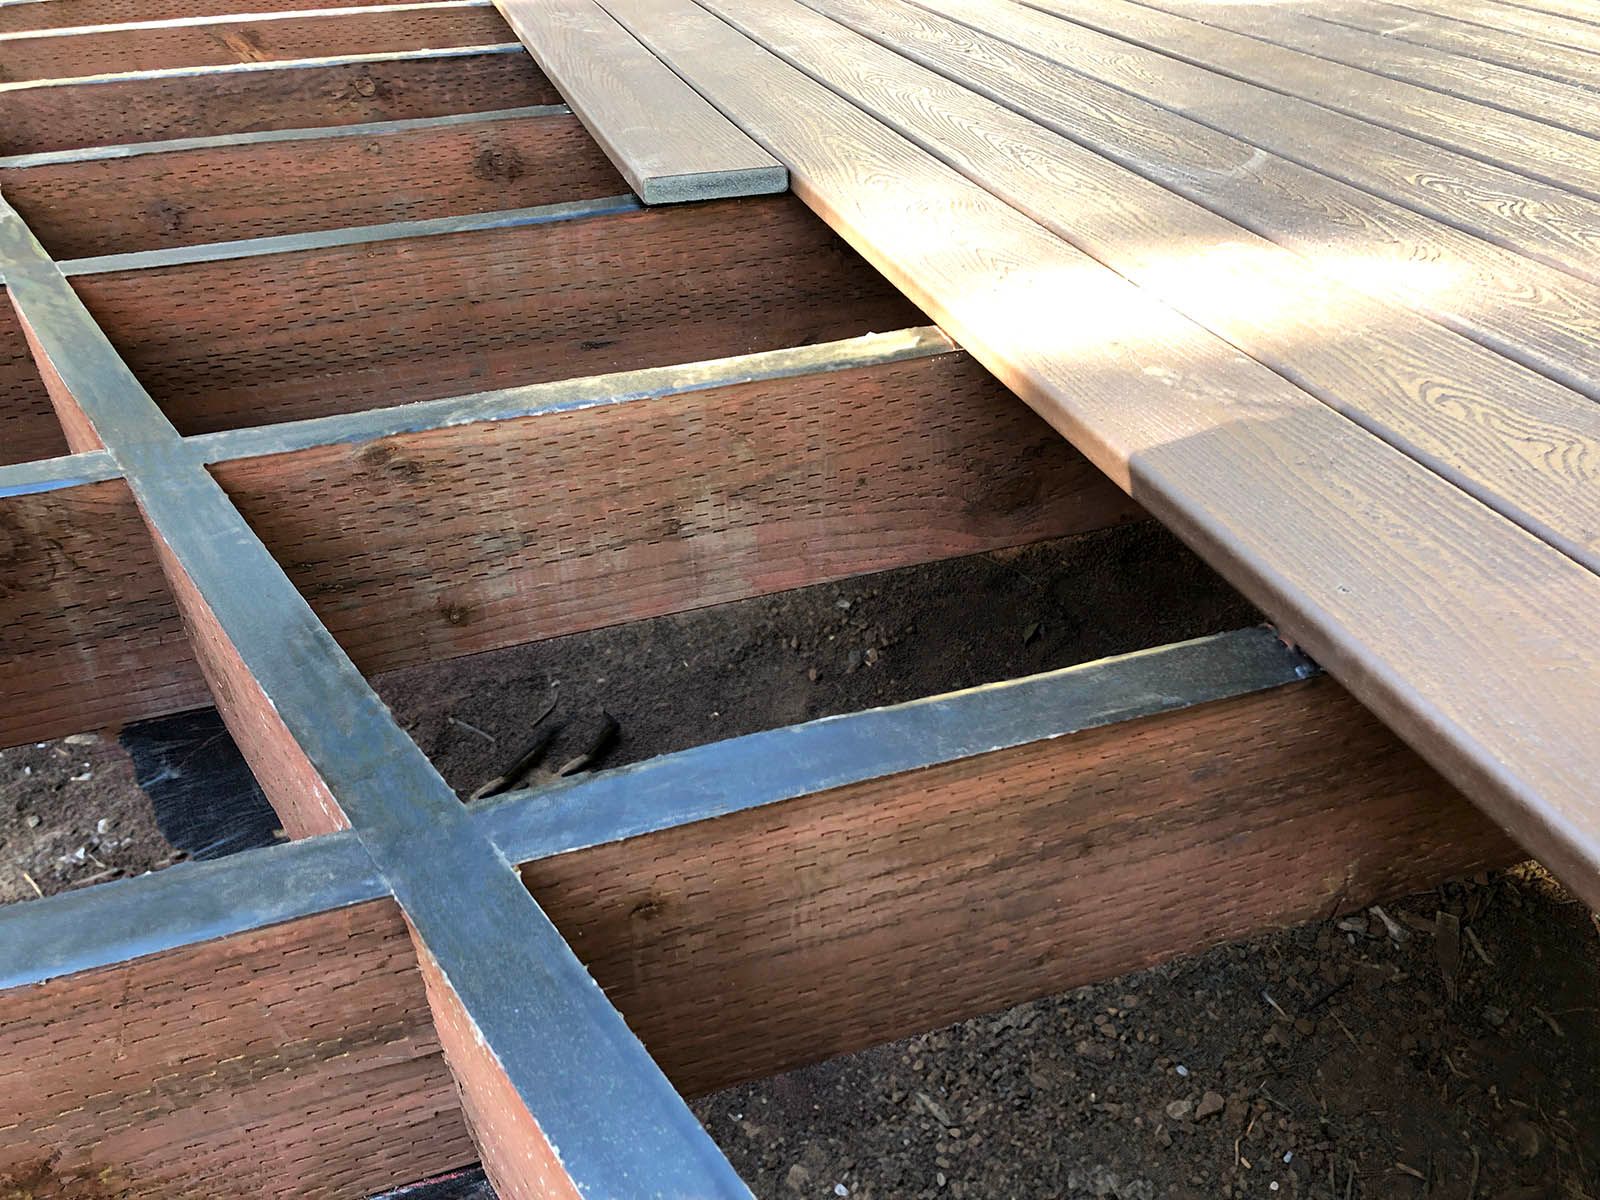 This is an image of Trex Protect Joist tape being used and showing the deck boards laying on top of some of the sections.